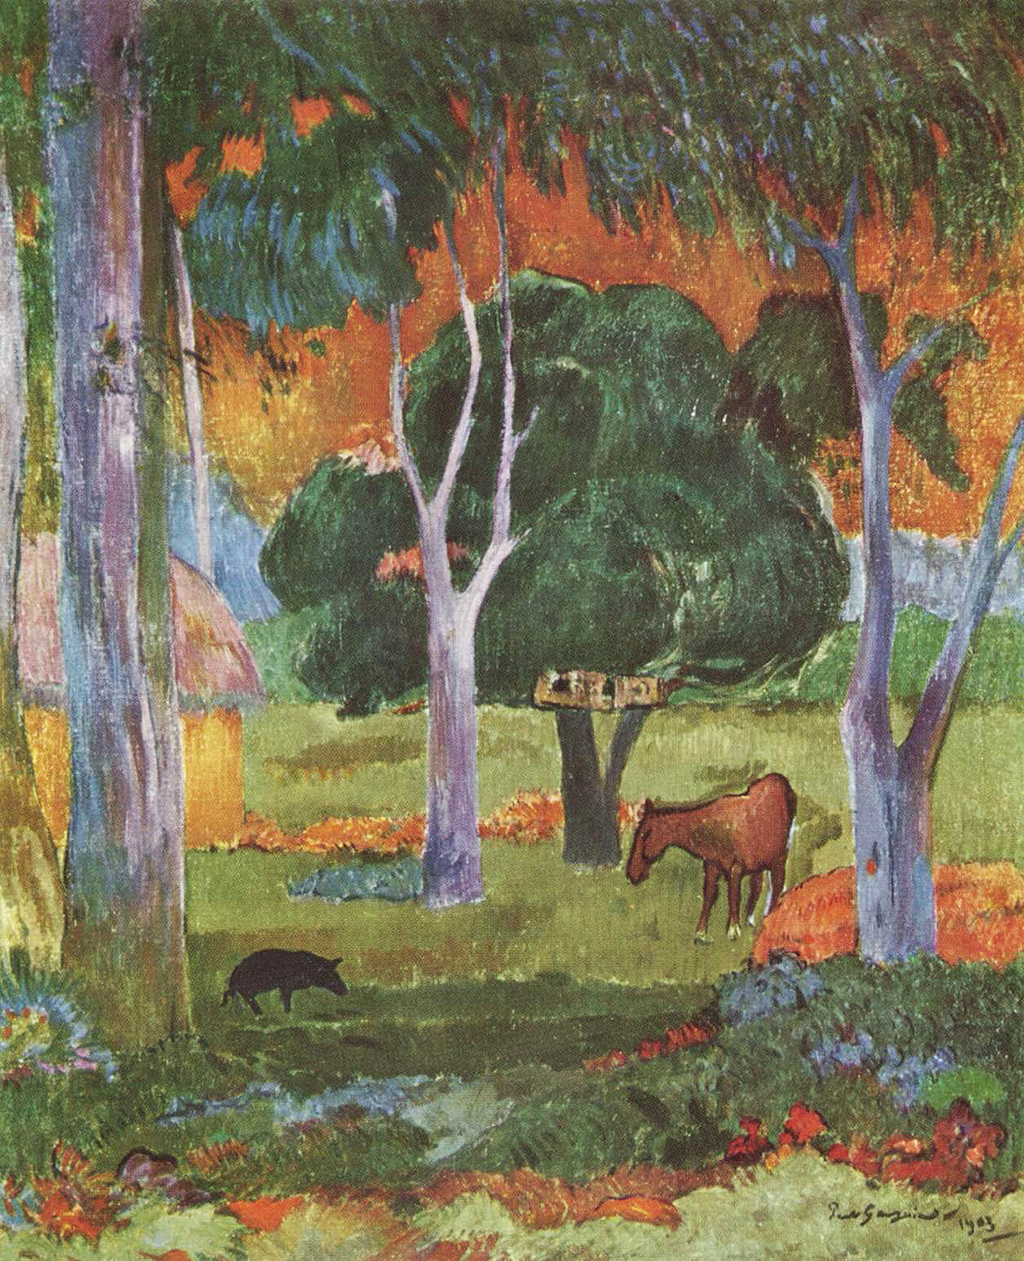 Landscape with a Pig and a Horse (Hiva Oa) in Detail Paul Gauguin